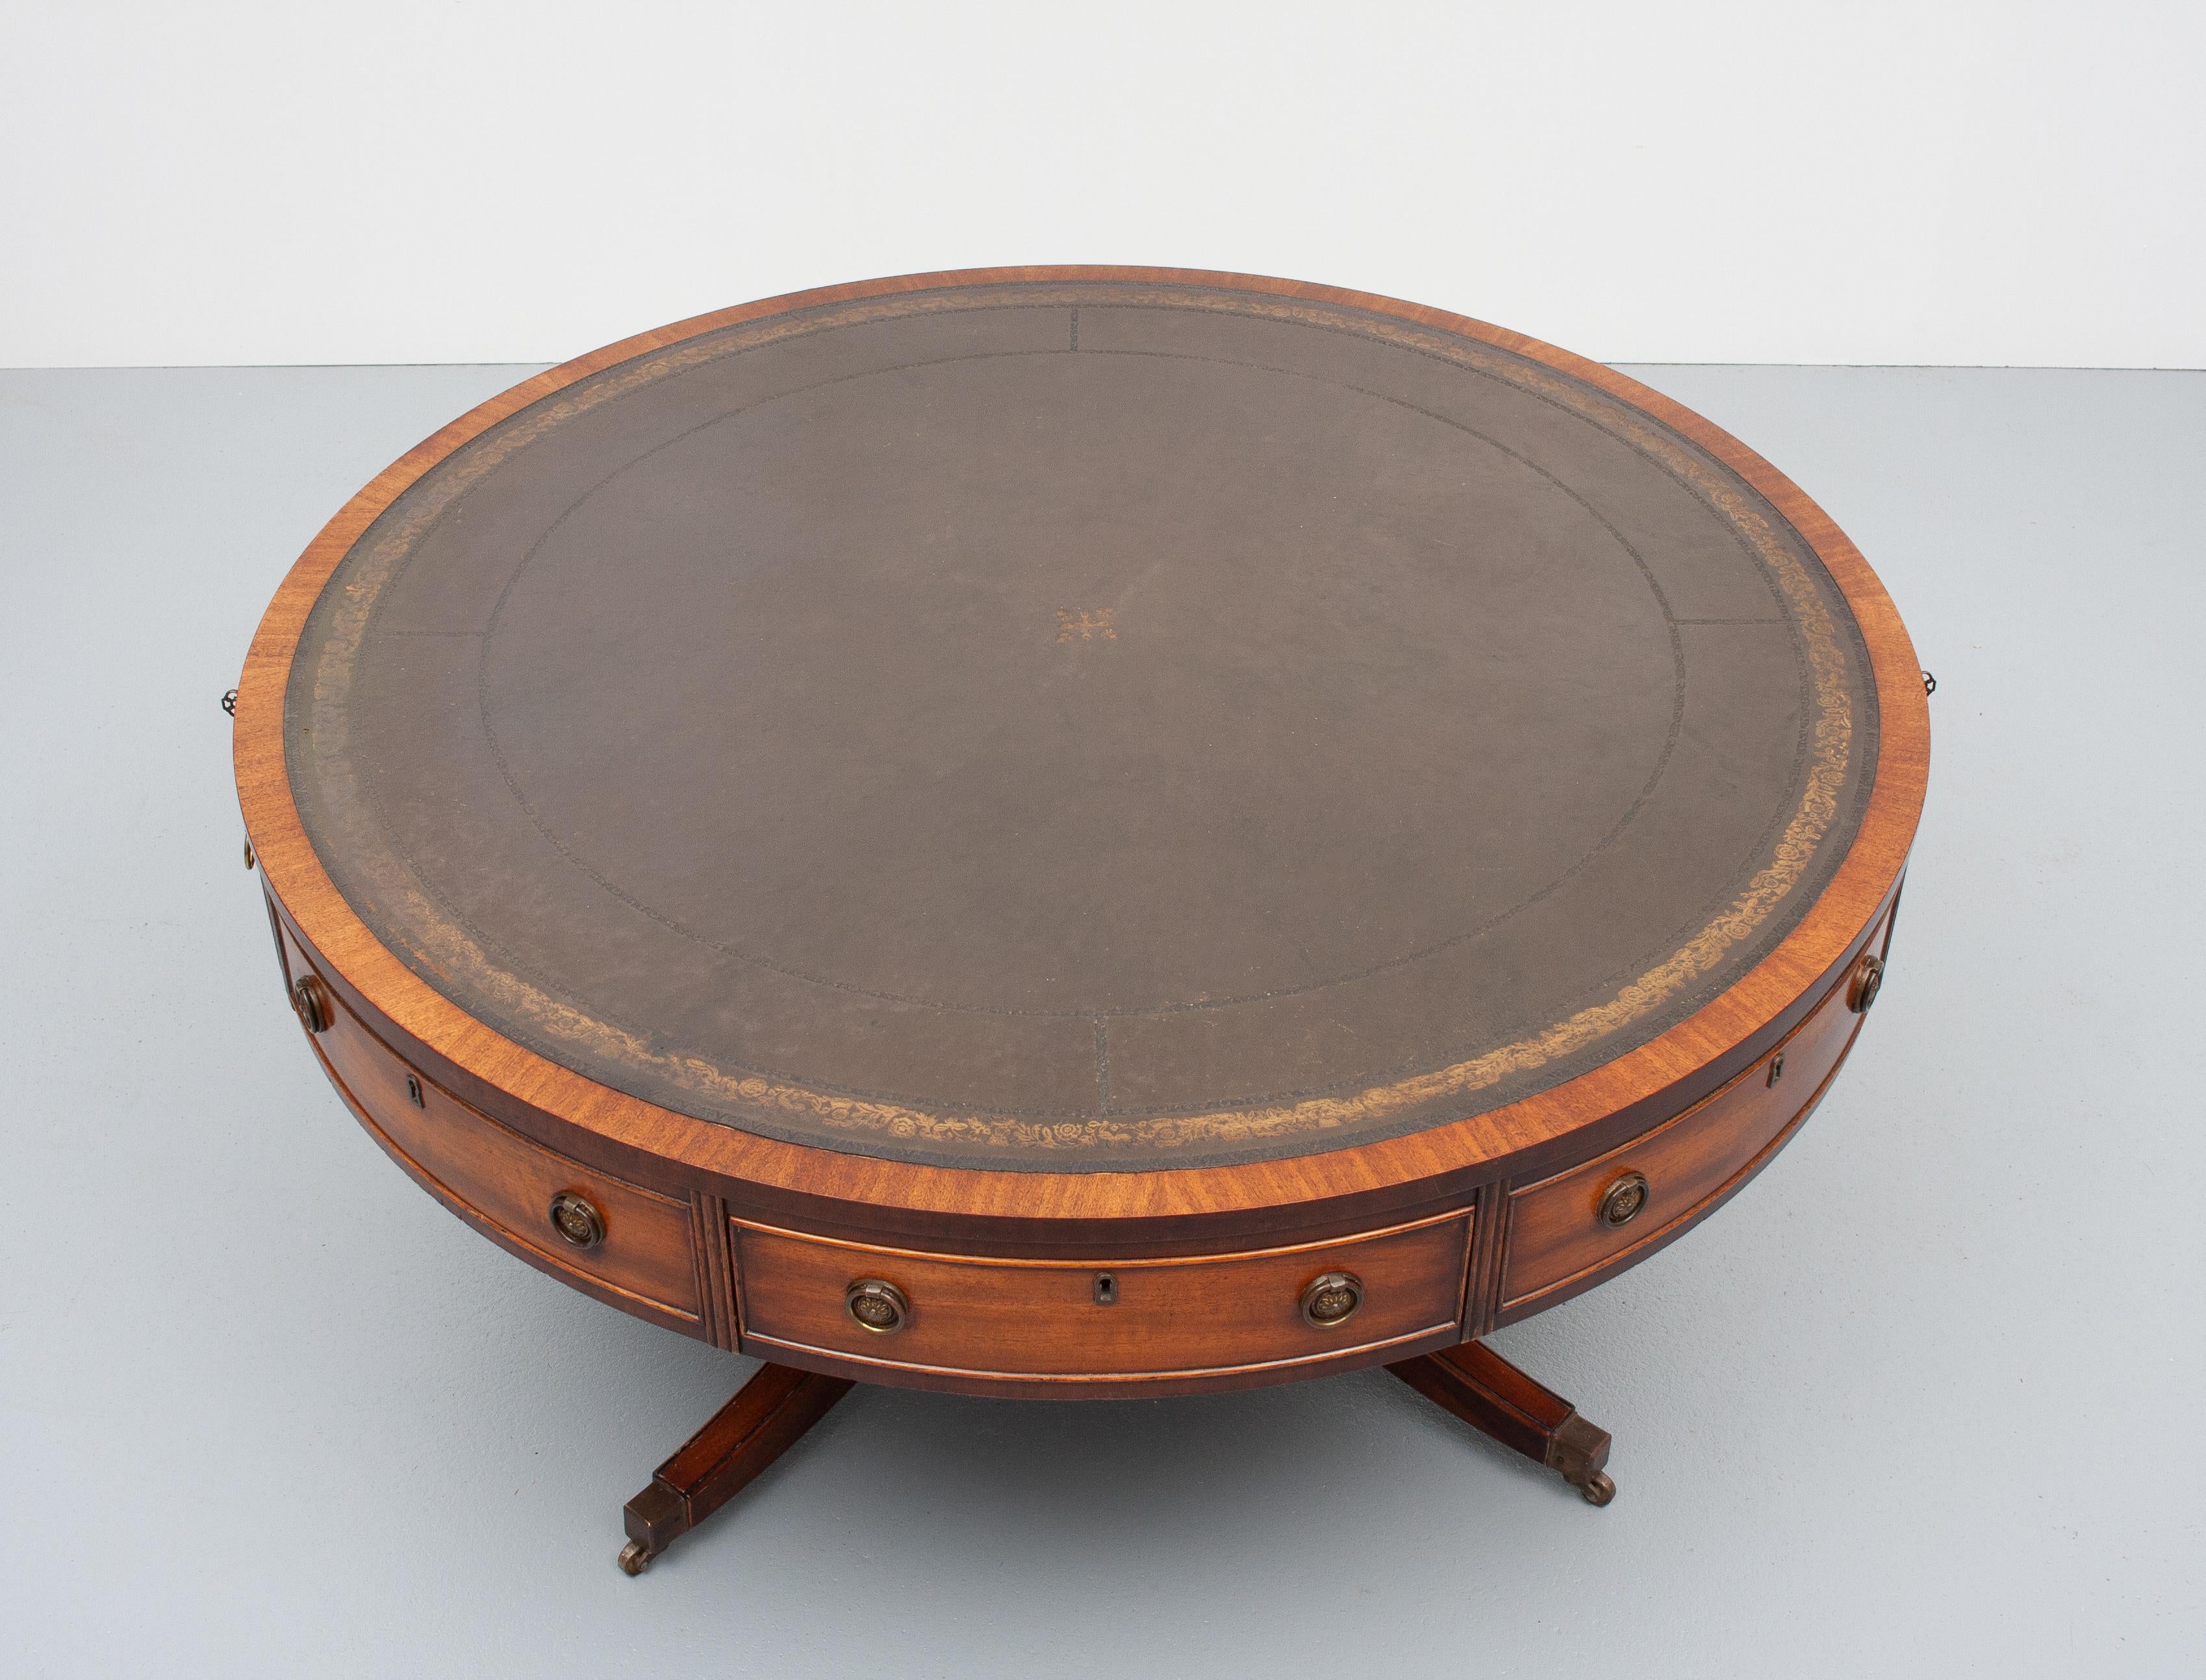 Georgian English Bevan Funell   Reprodux  Leather Top Drum Table